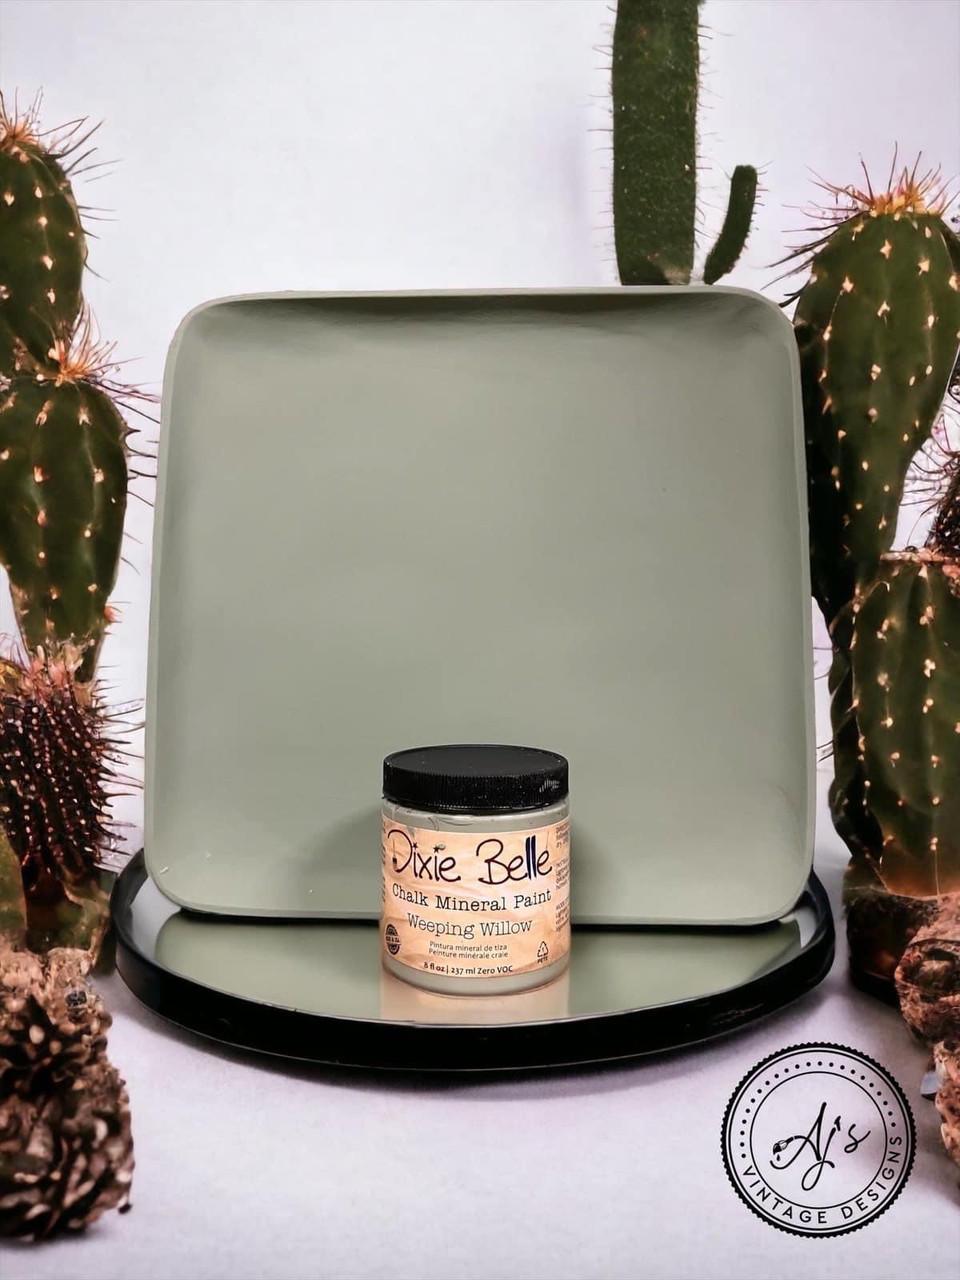 Dixie Belle Mineral Paint | Weeping Willow - Soft green